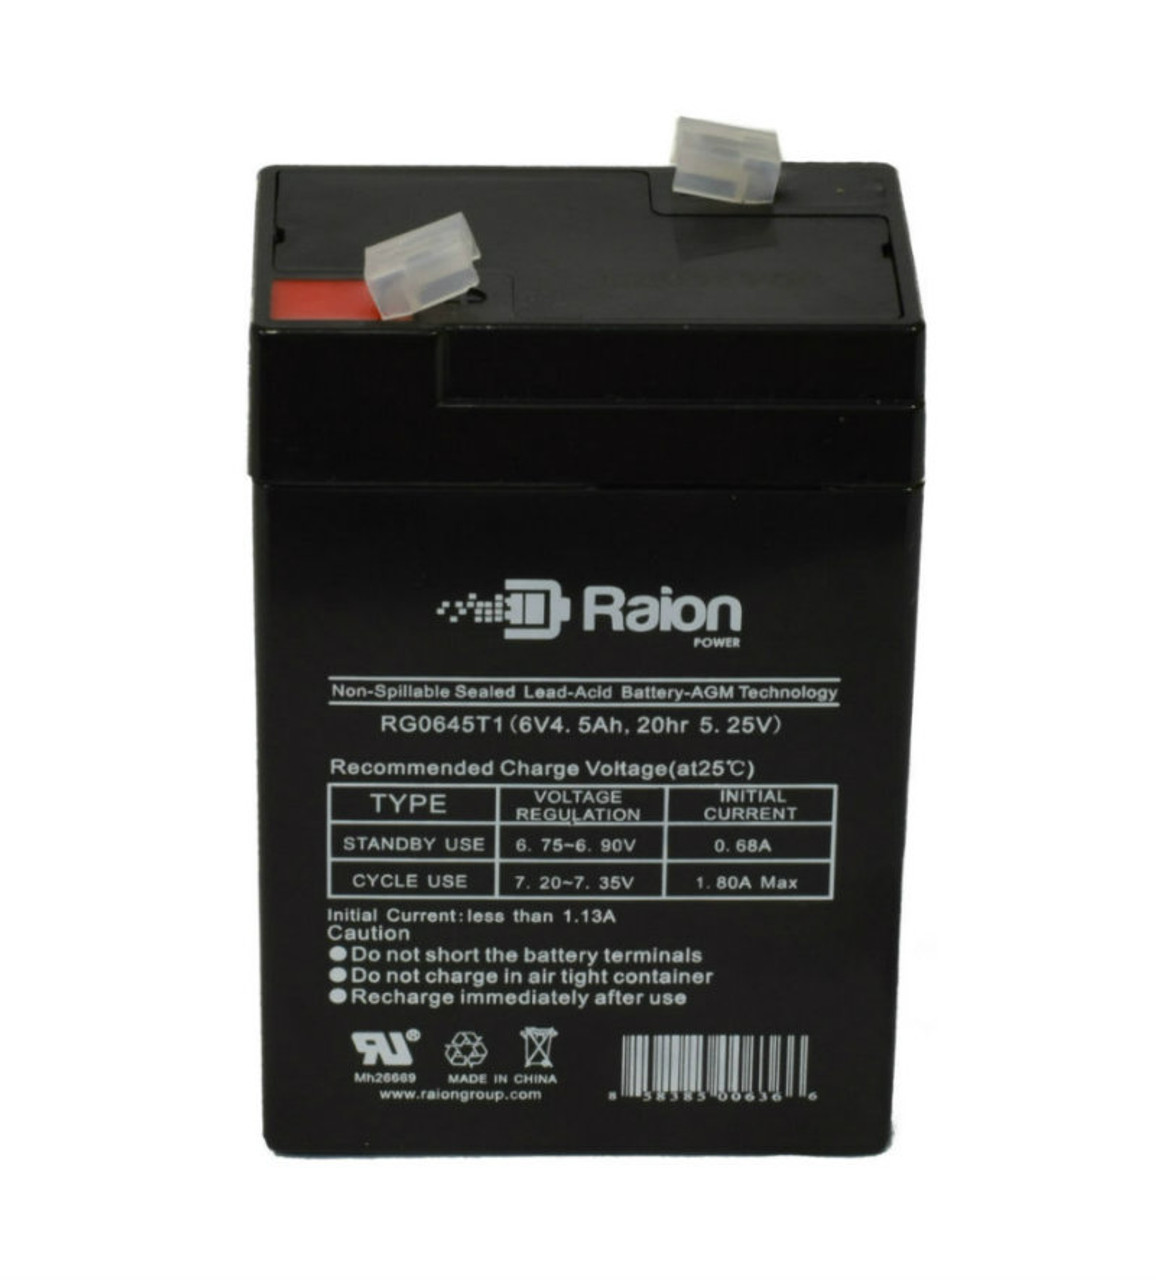 Raion Power RG0645T1 Replacement Battery Cartridge for Baxter Healthcare 821 Microate Inf Pump